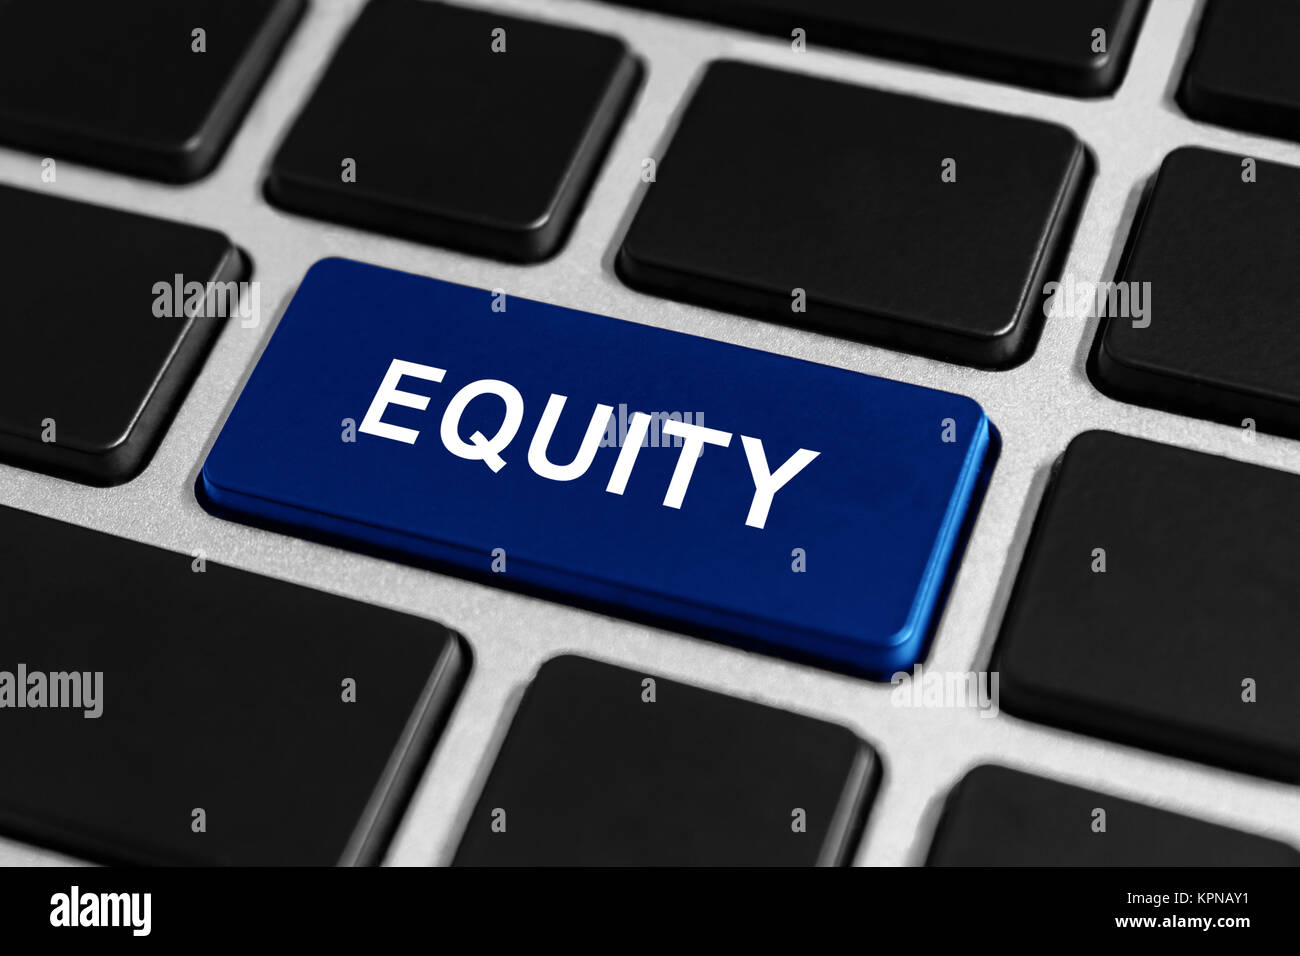 equity button on keyboard Stock Photo